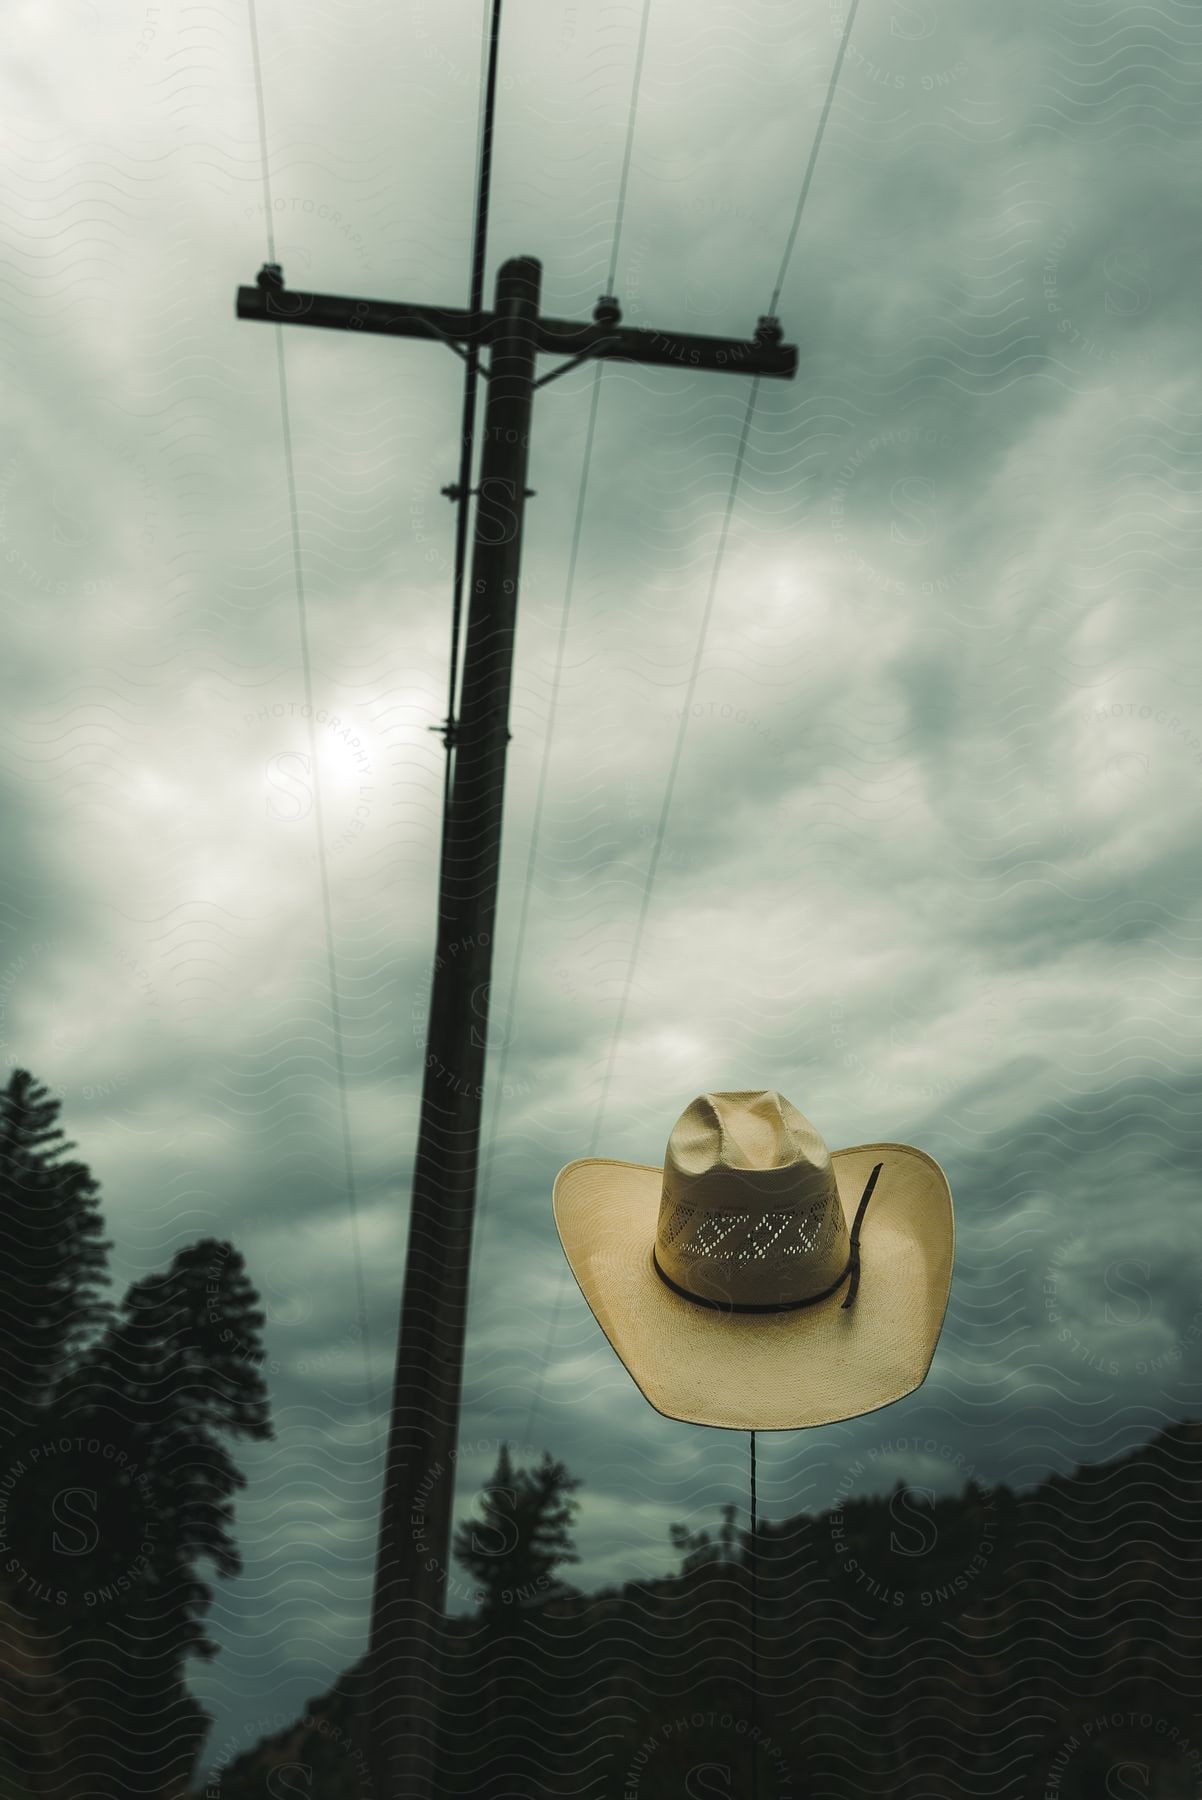 A cowboy hat outdoors on a cloudy day with a power line next to it.